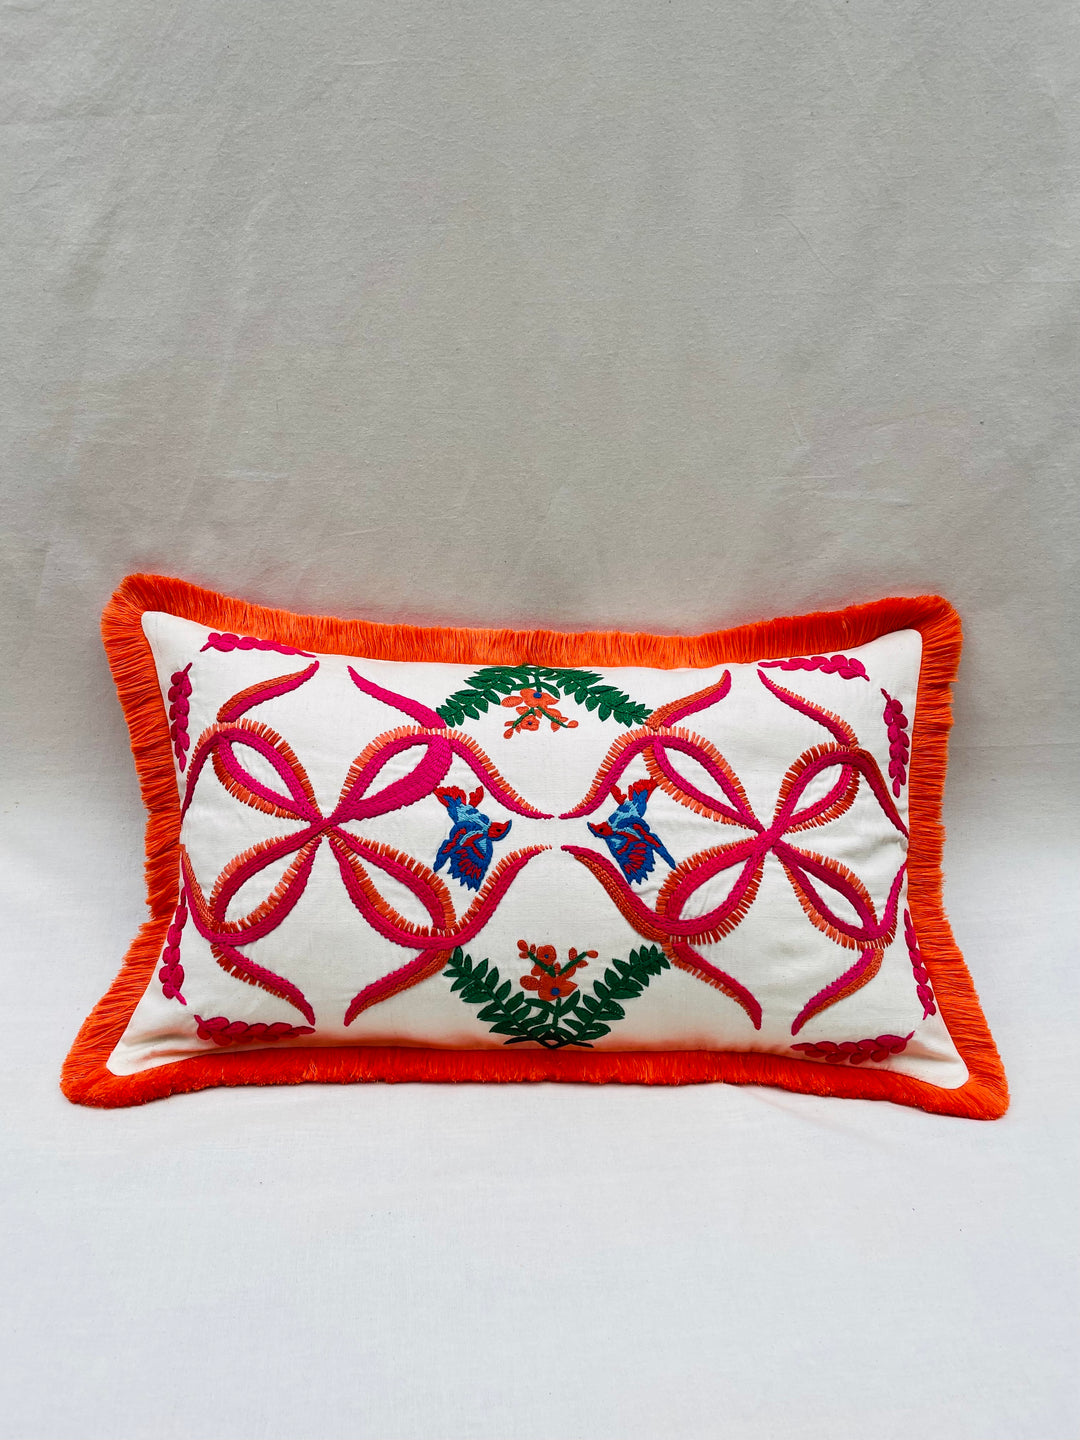 Hand-Embroidered Parakeet Fringe Throw Pillow Cover